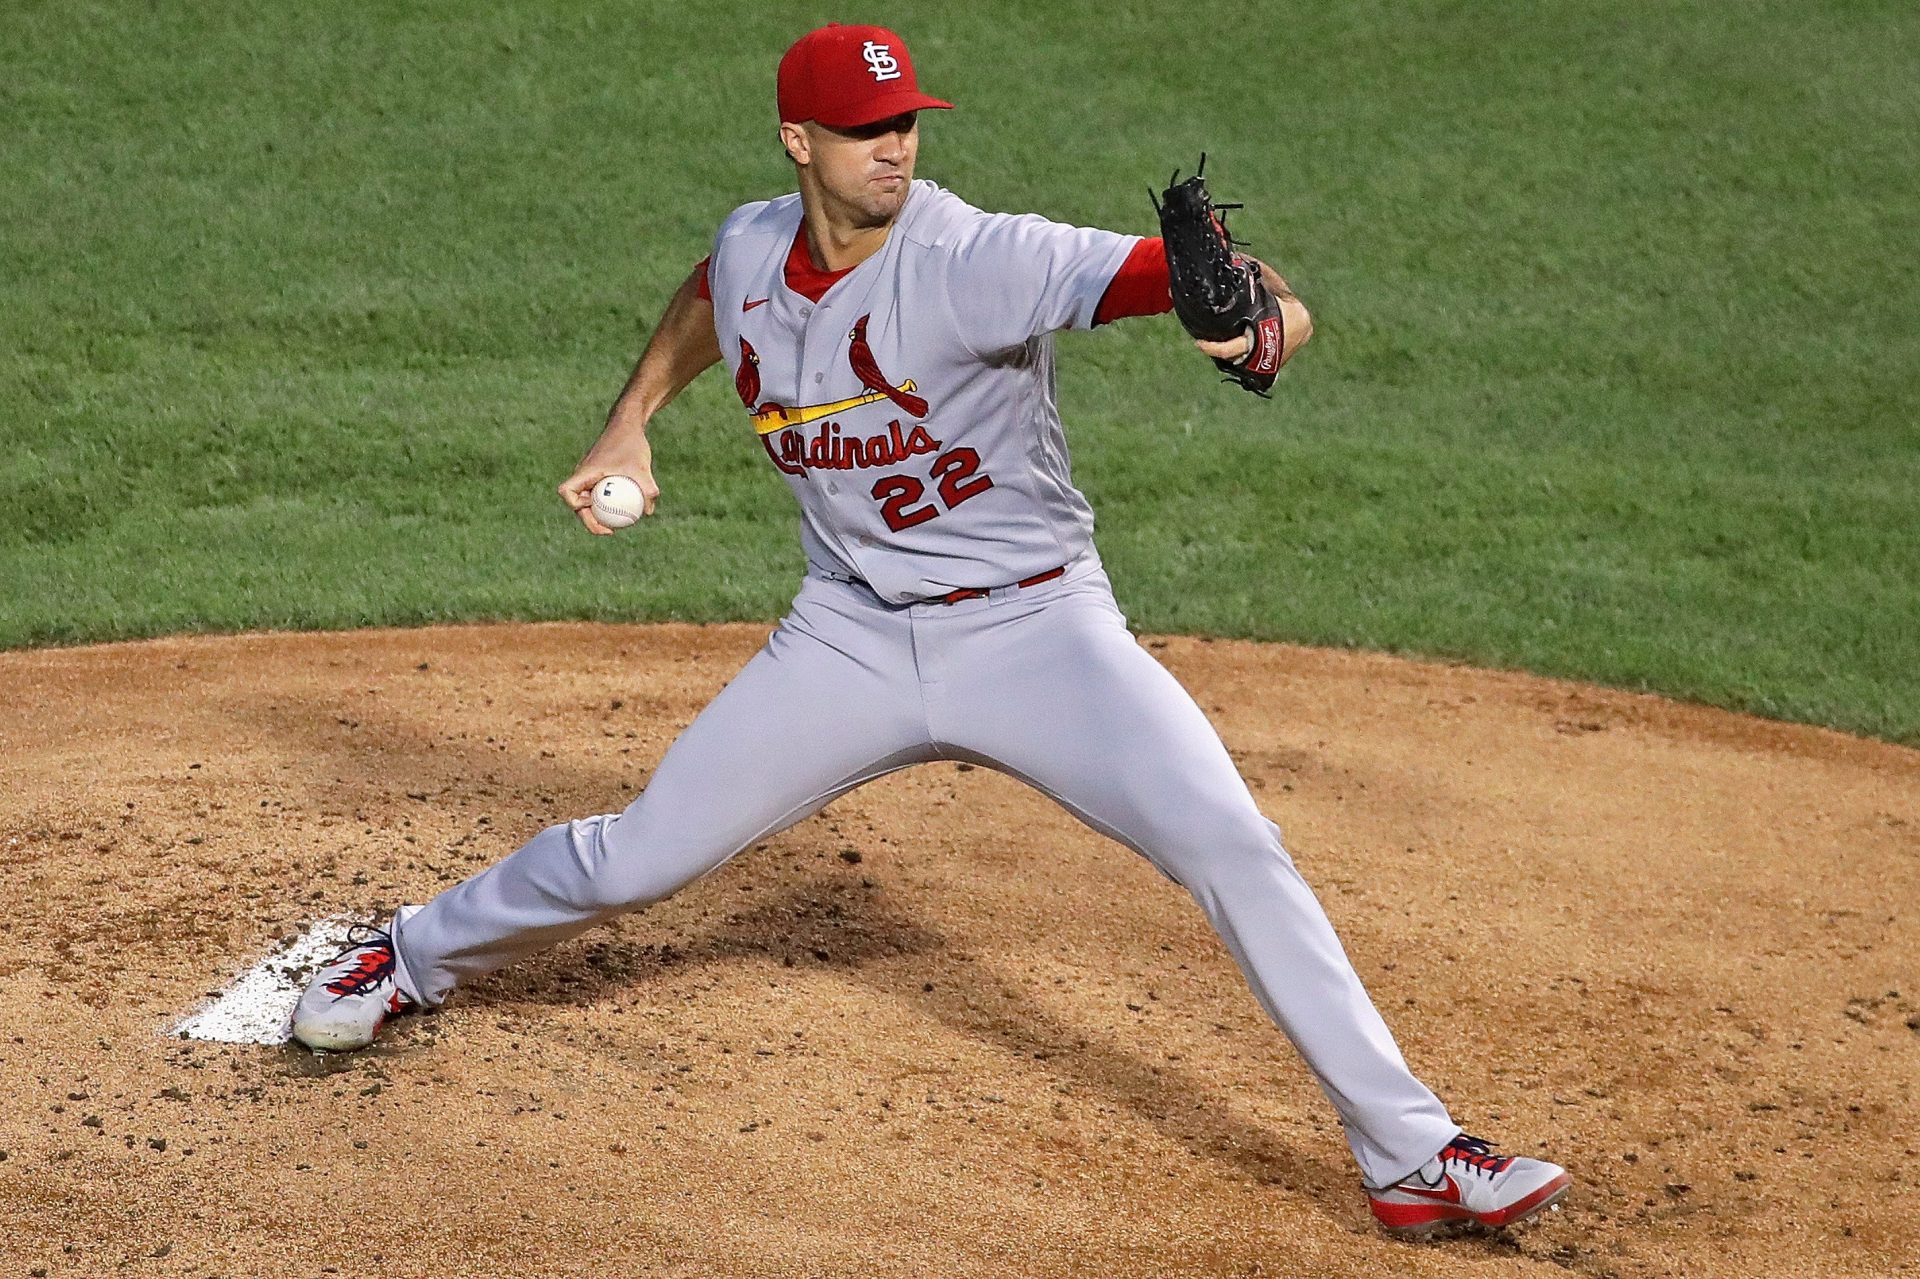 Cardinals vs. Brewers prediction: Bet on Jack Flaherty